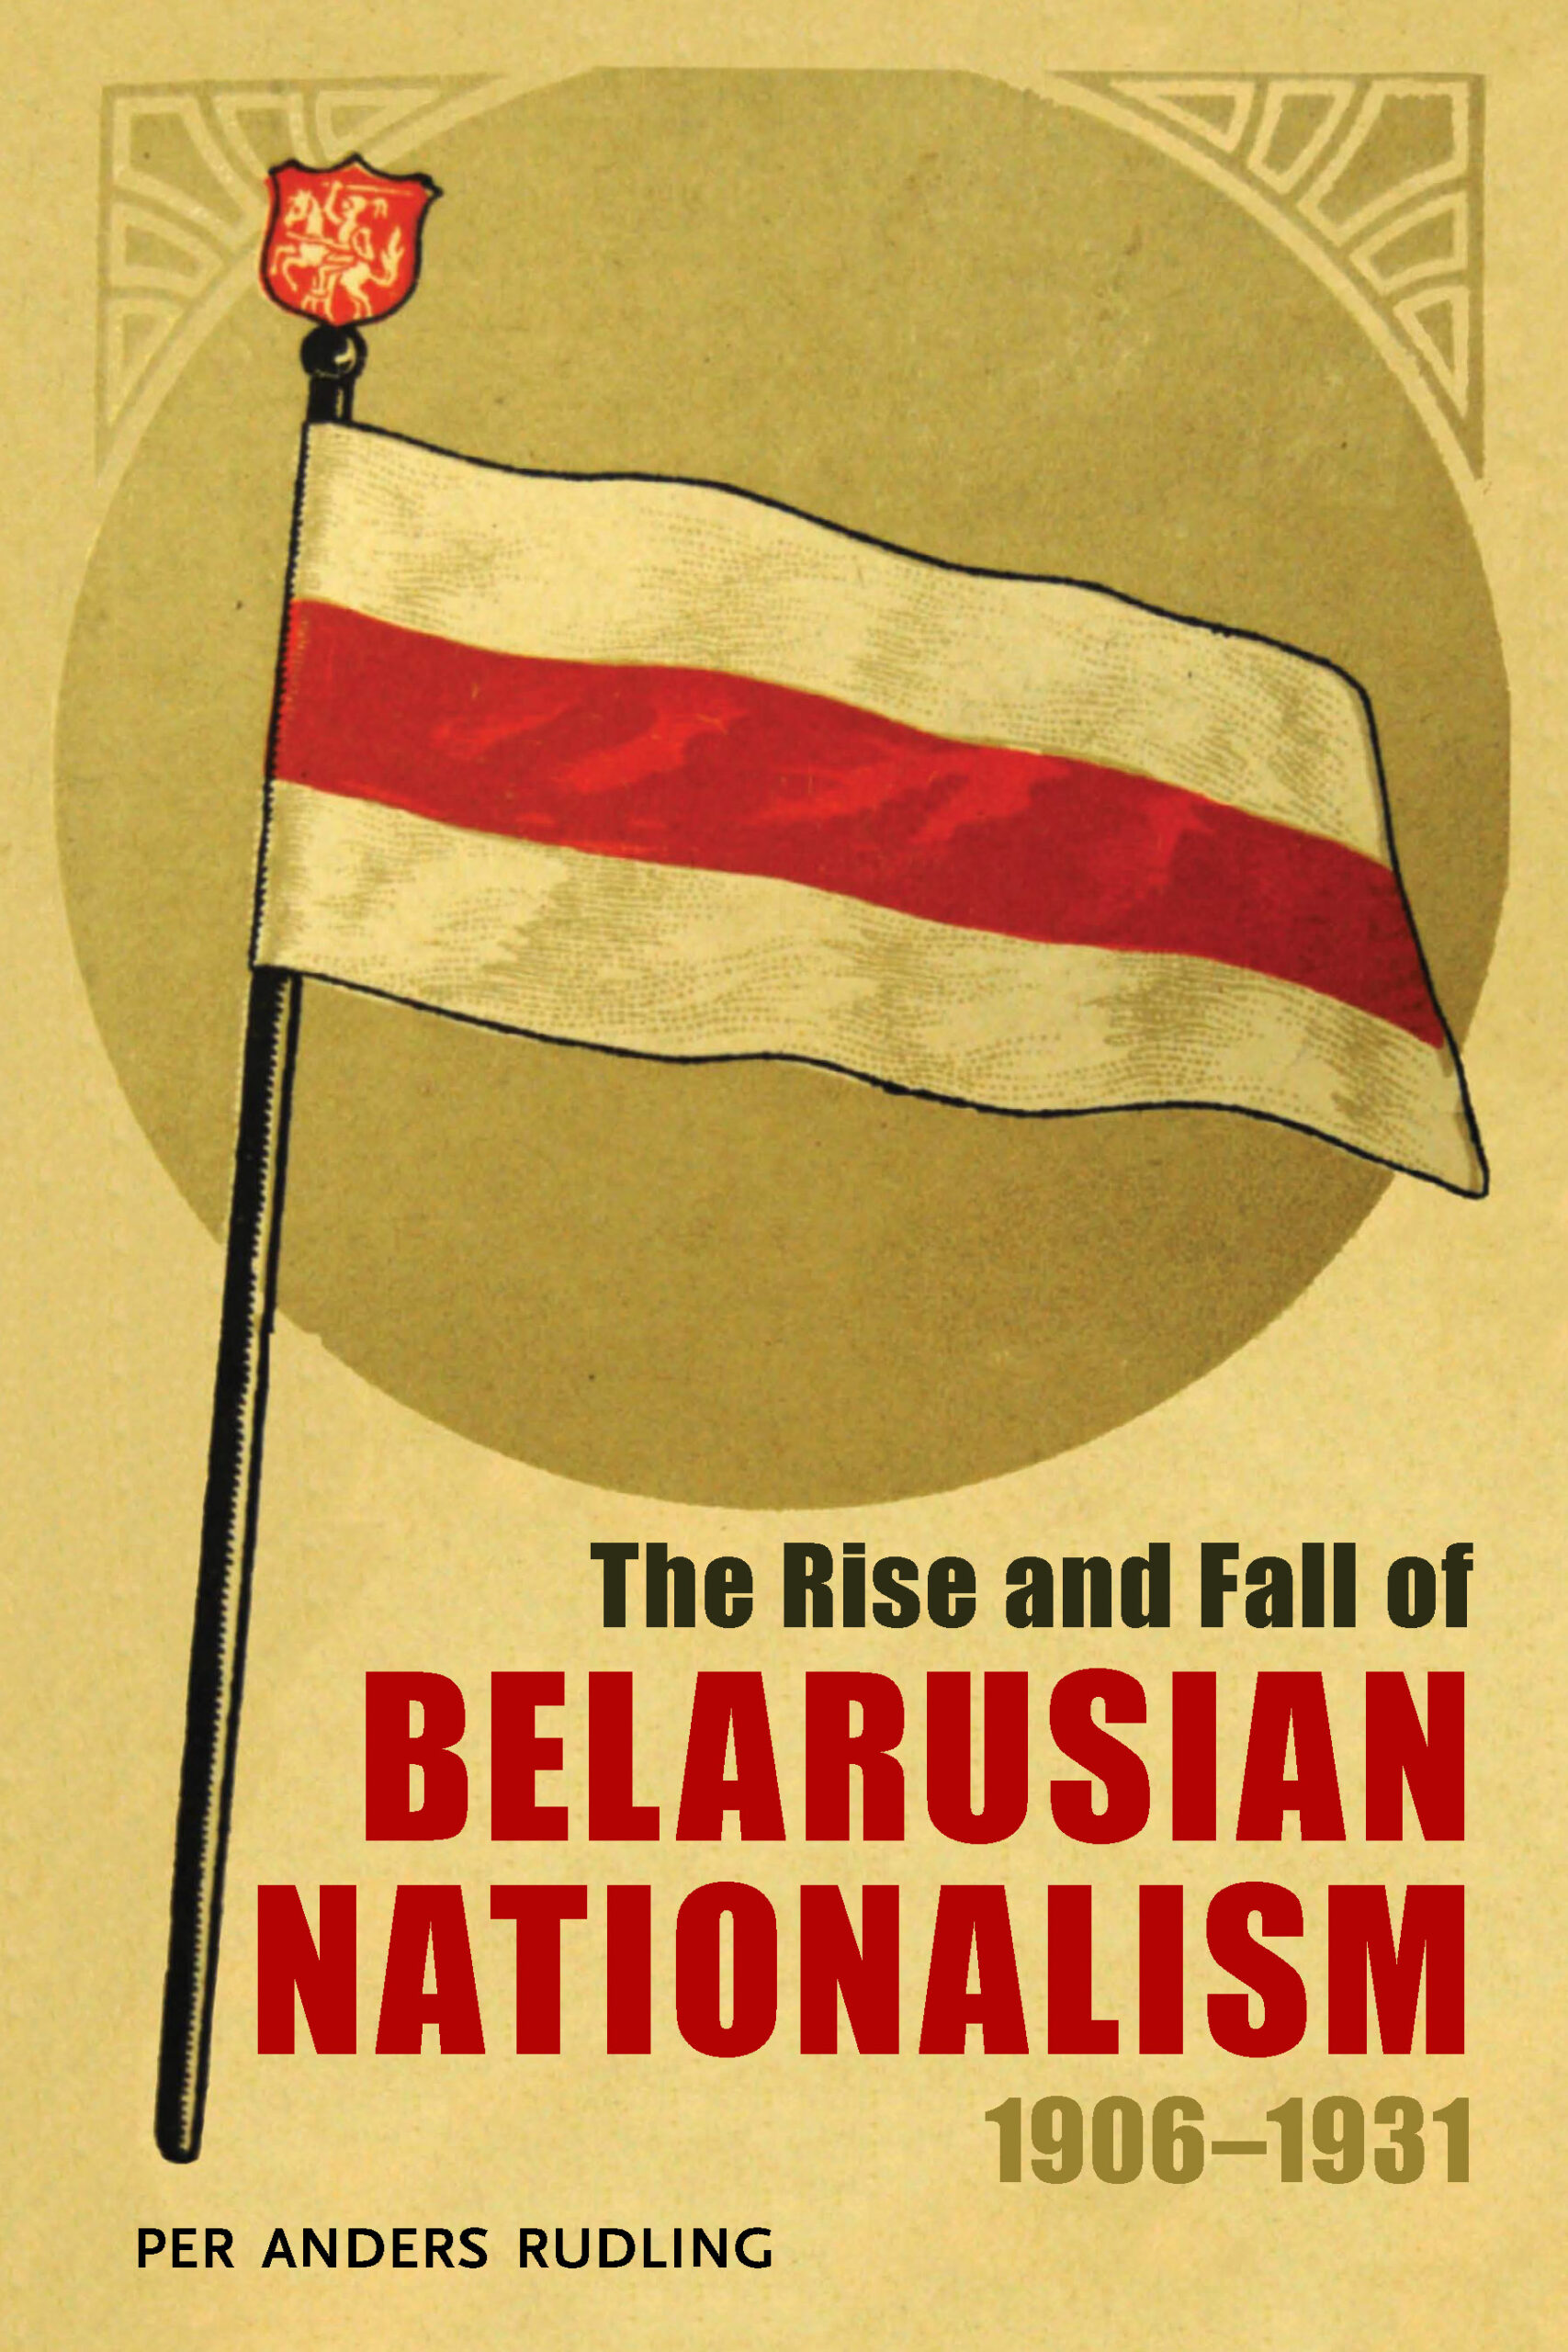 The Rise and Fall of Belarusian Nationalism, 1906–1931 - University of  Pittsburgh Press